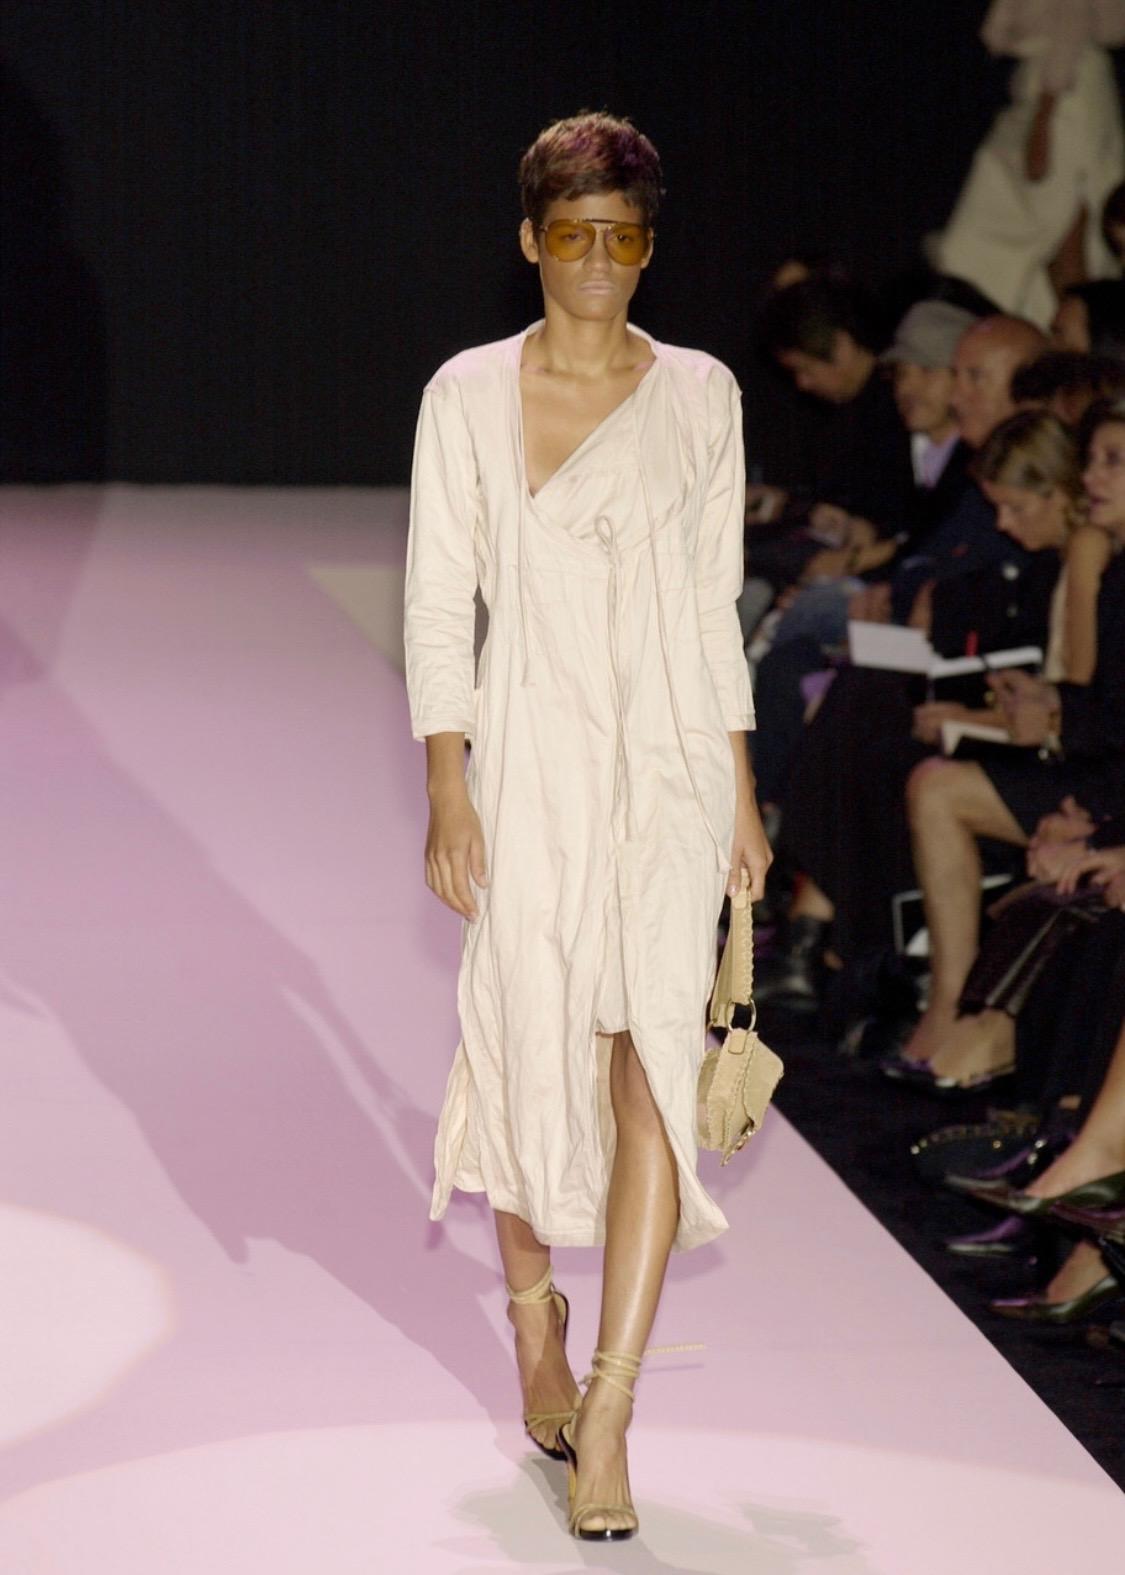 Presenting a dark olive cotton duster coat designed by Tom Ford for Gucci's Spring/Summer 2002 collection. An off-white suede version of this coat debuted on look 4 on Karolina Kurkova on the season's runway. This fabulous coat features tie